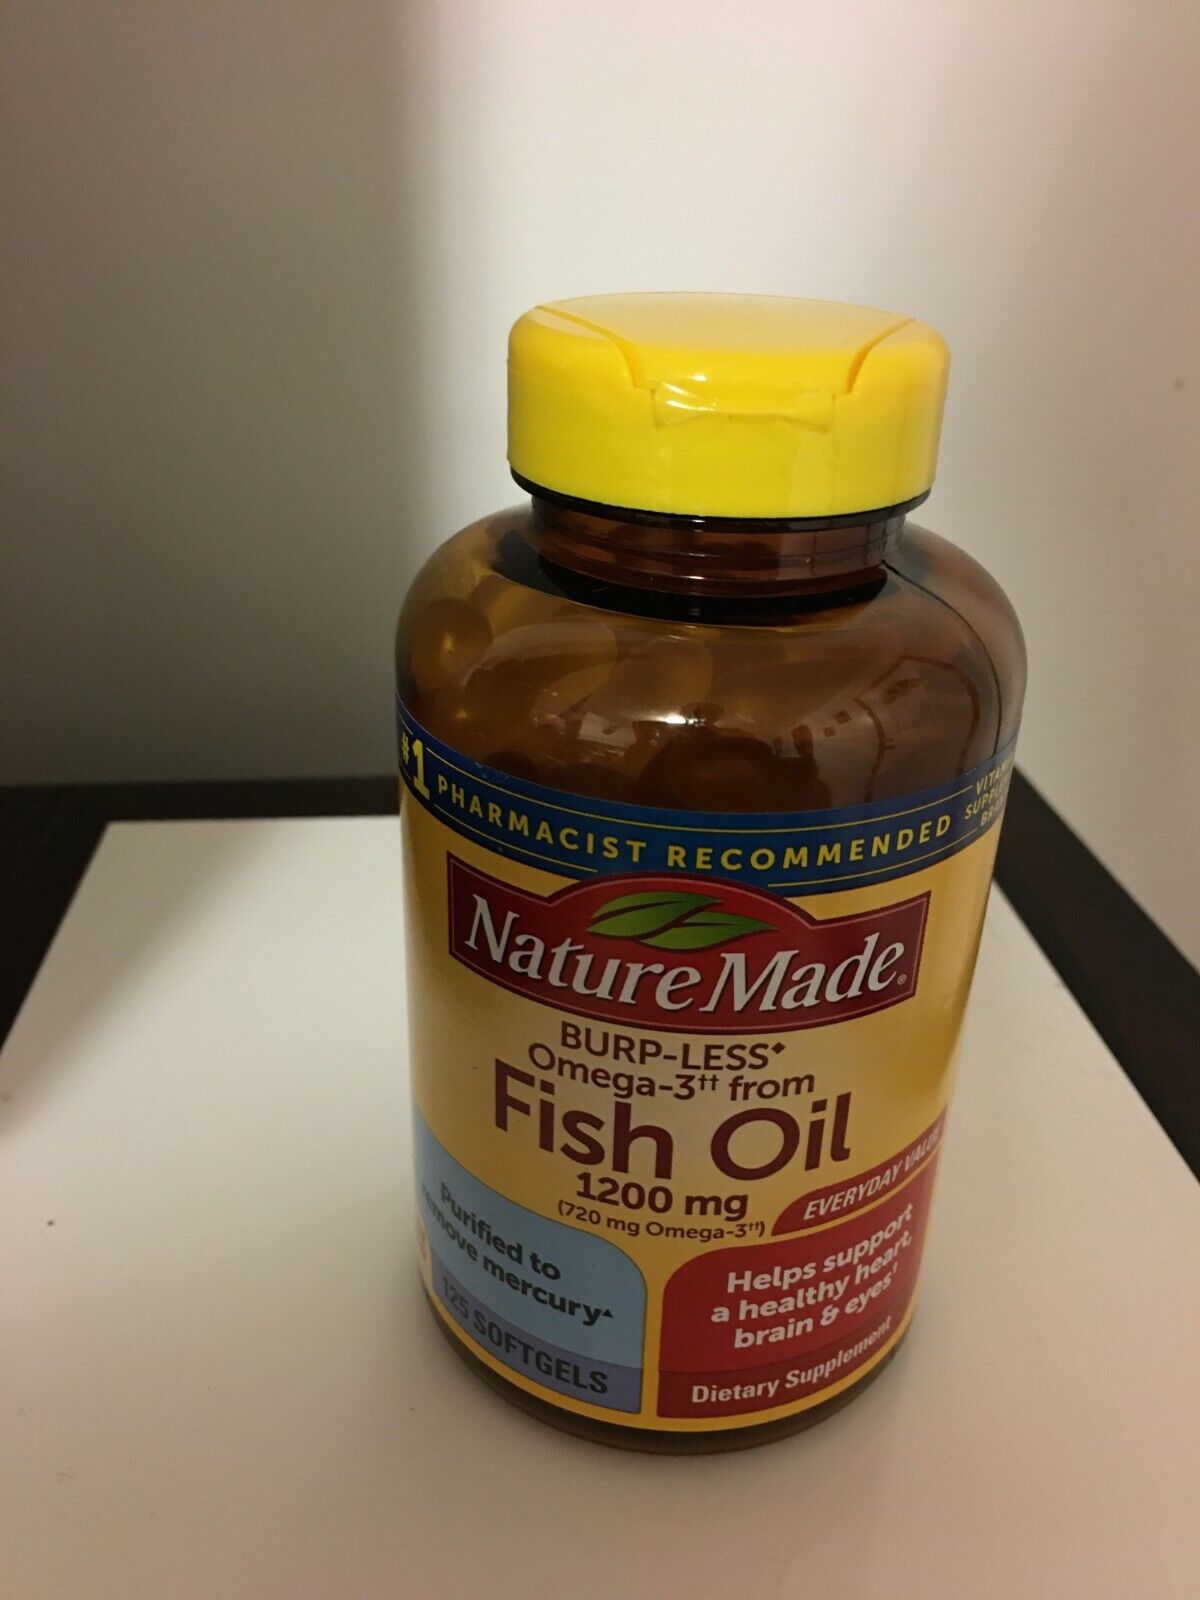 BRAND NEW NATURE MADE 1200 MG ONE PER DAY BURP-LESS FISH OIL 125 COUNT BOTTLE